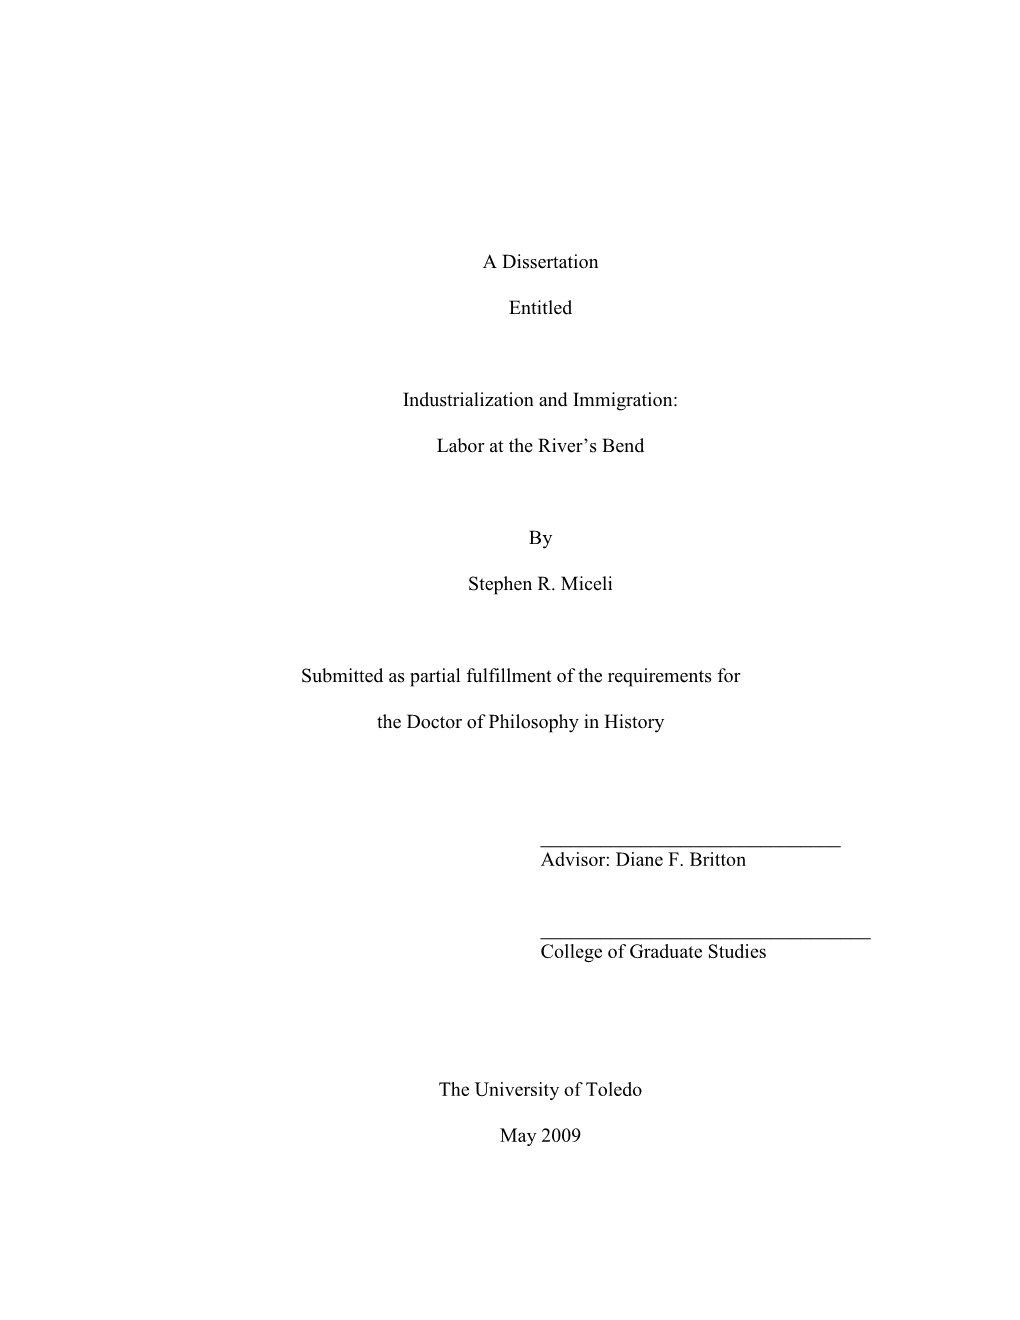 A Dissertation Entitled Industrialization and Immigration